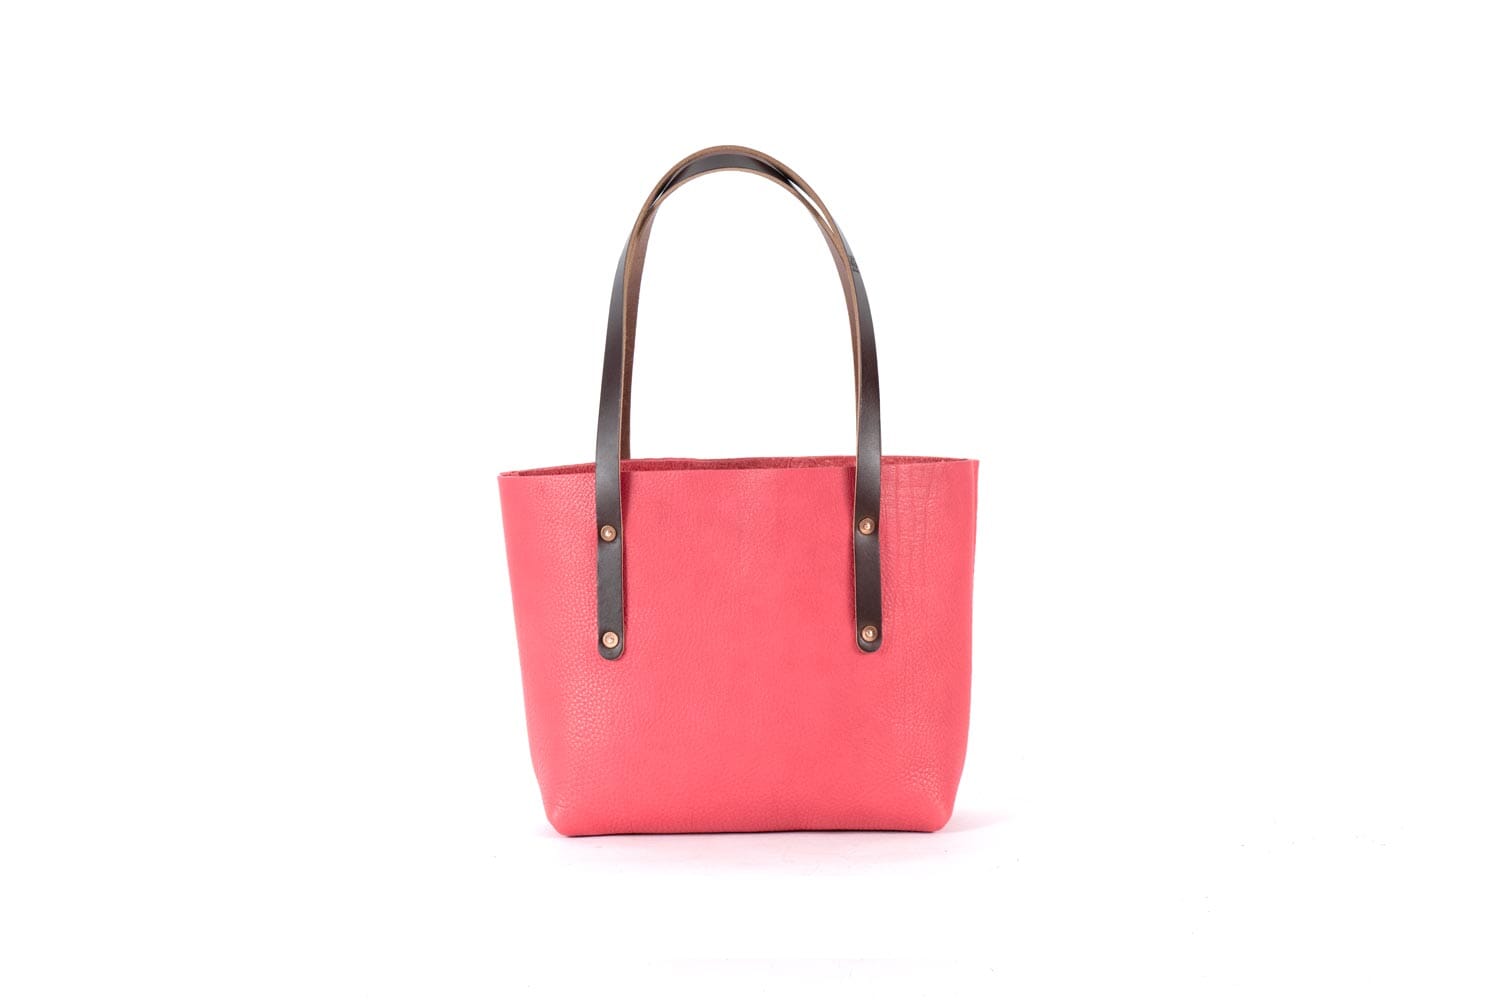 AVERY LEATHER TOTE BAG - SMALL - PINK